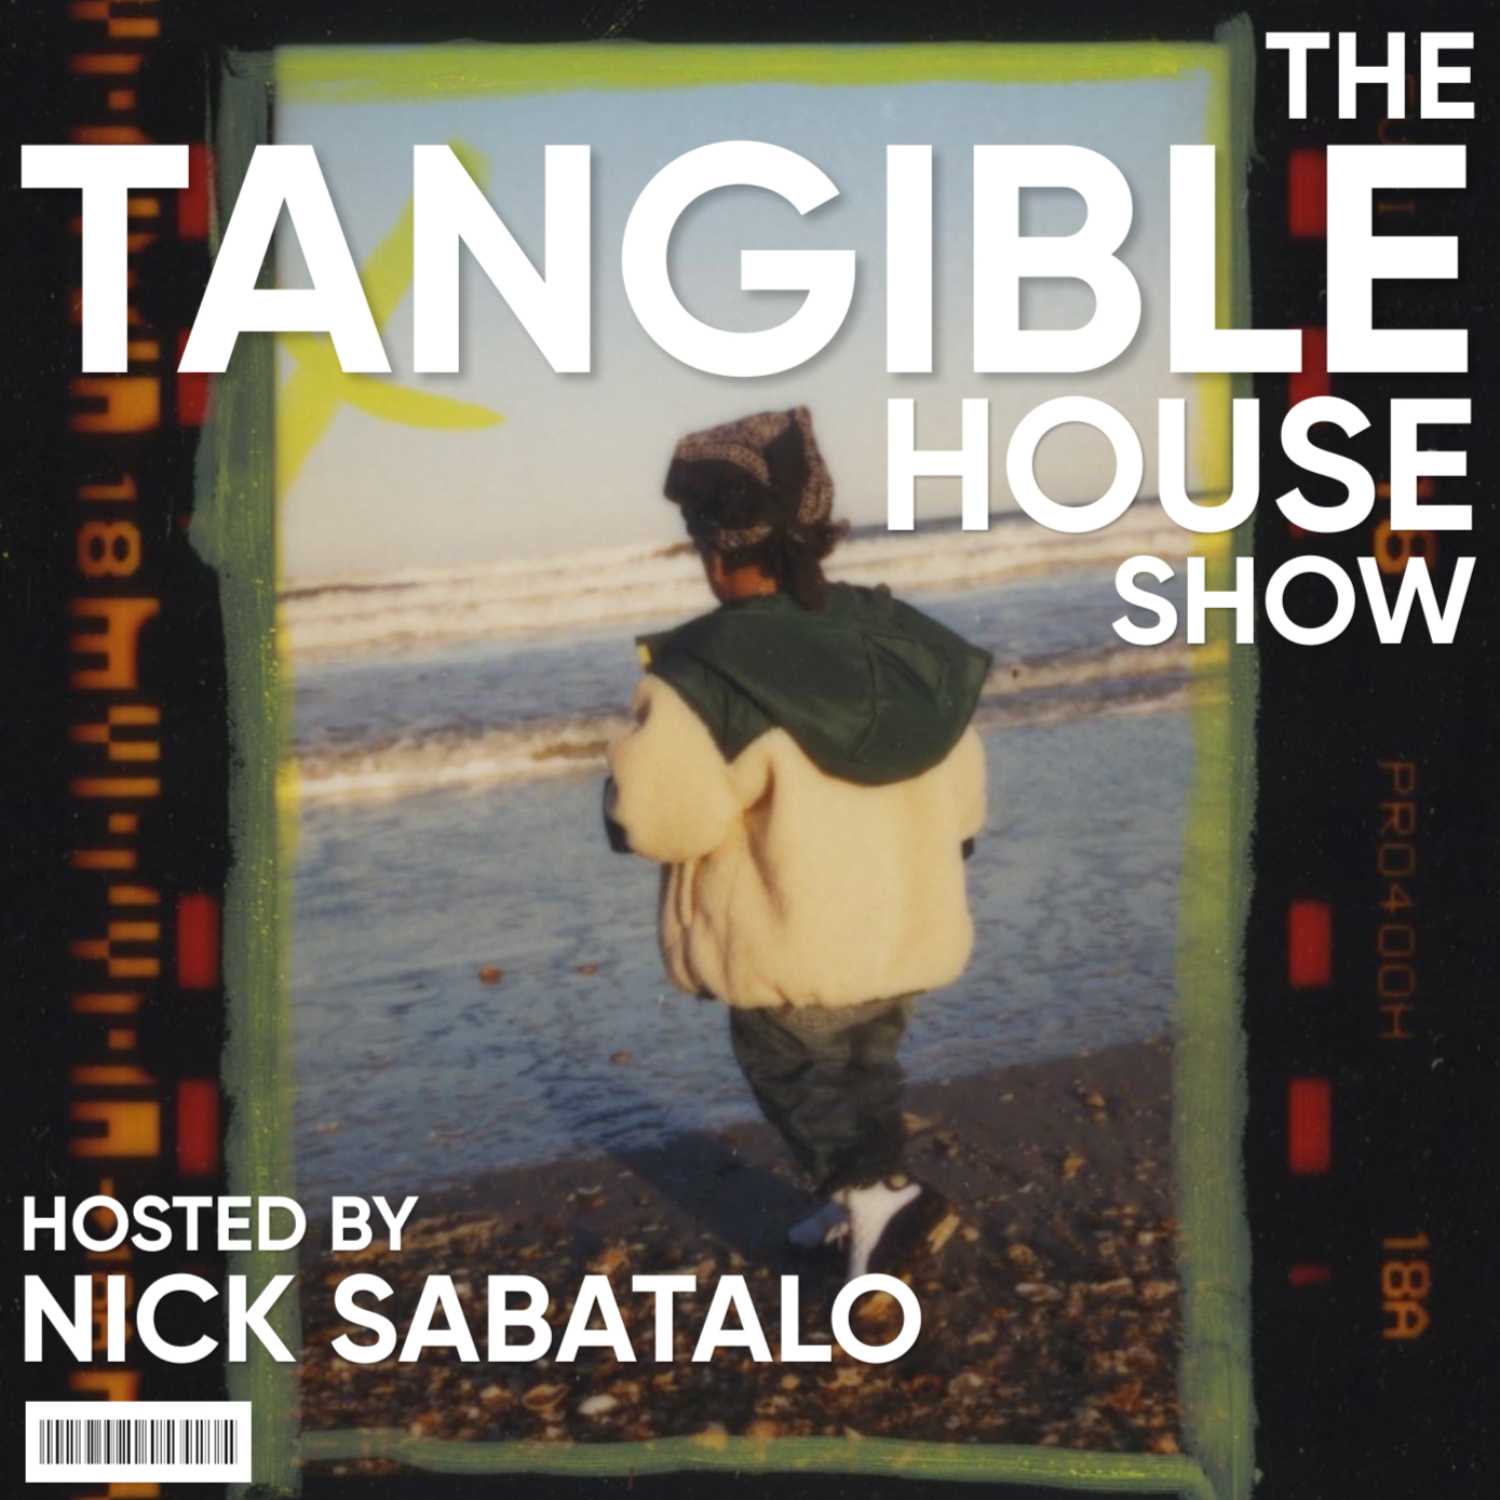 The Tangible House Show